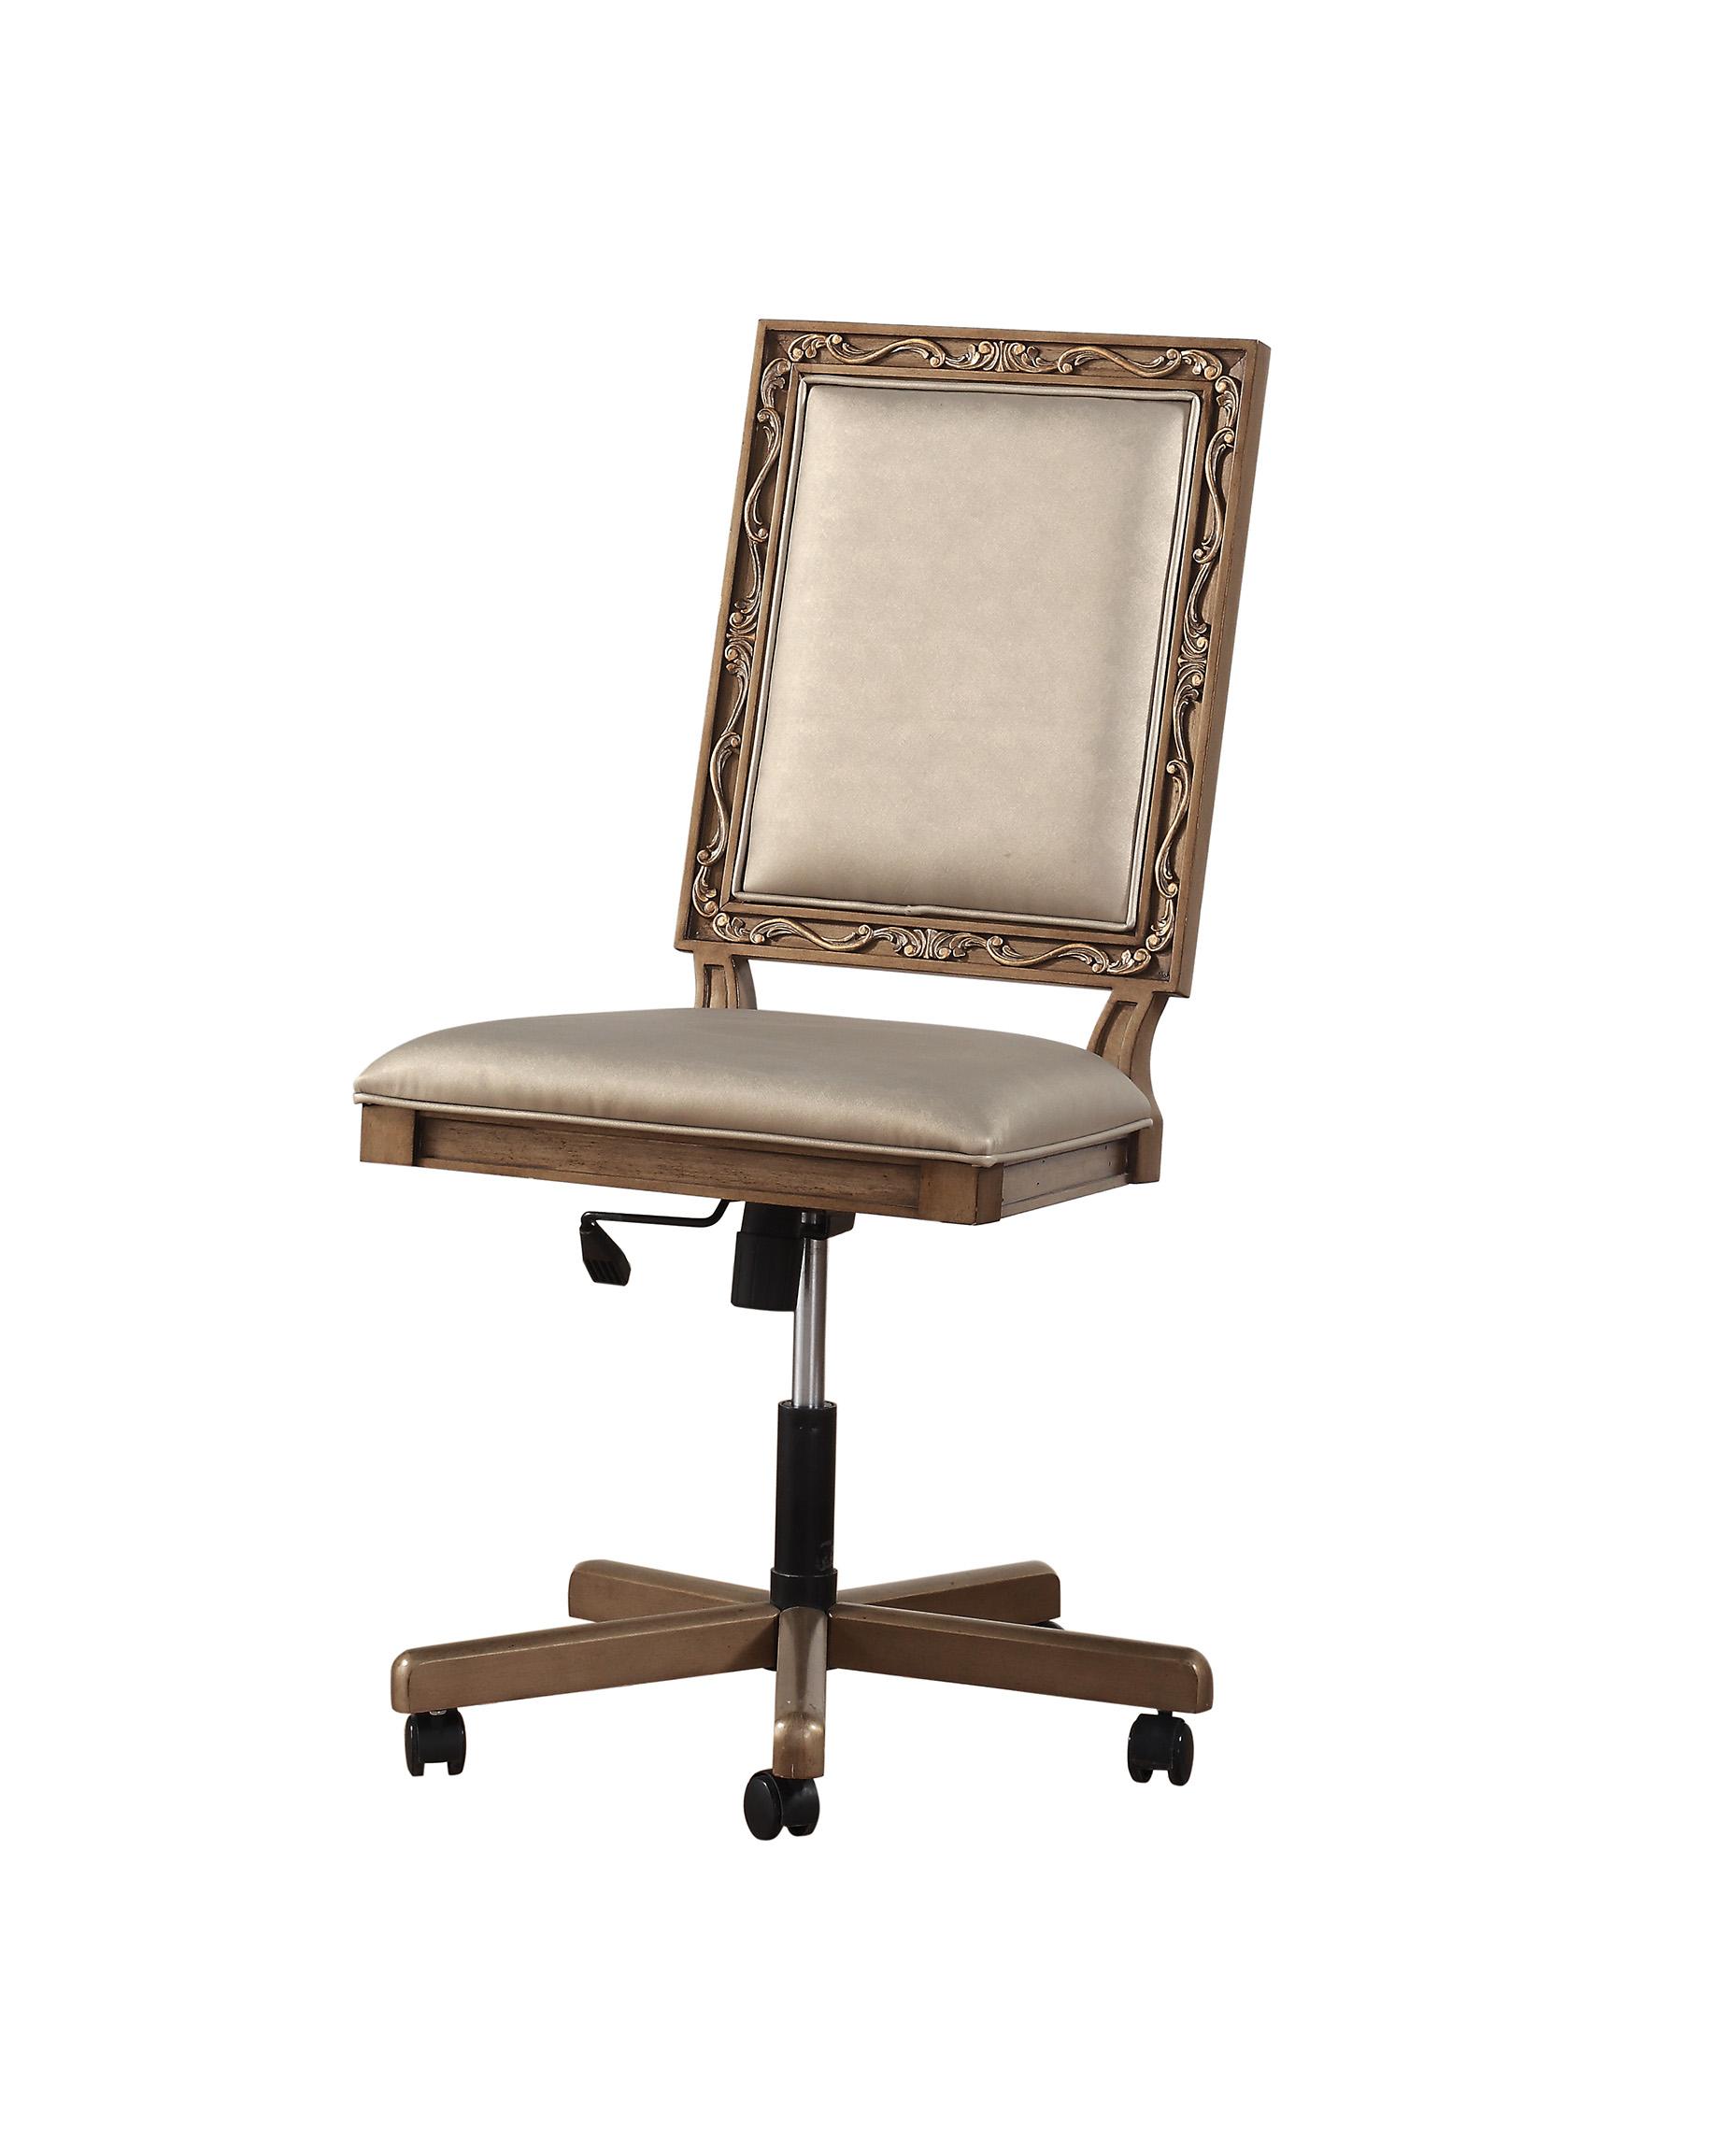 Classic, Traditional Office Chair Orianne Orianne-91437 in Antique, Gold, Champagne PU